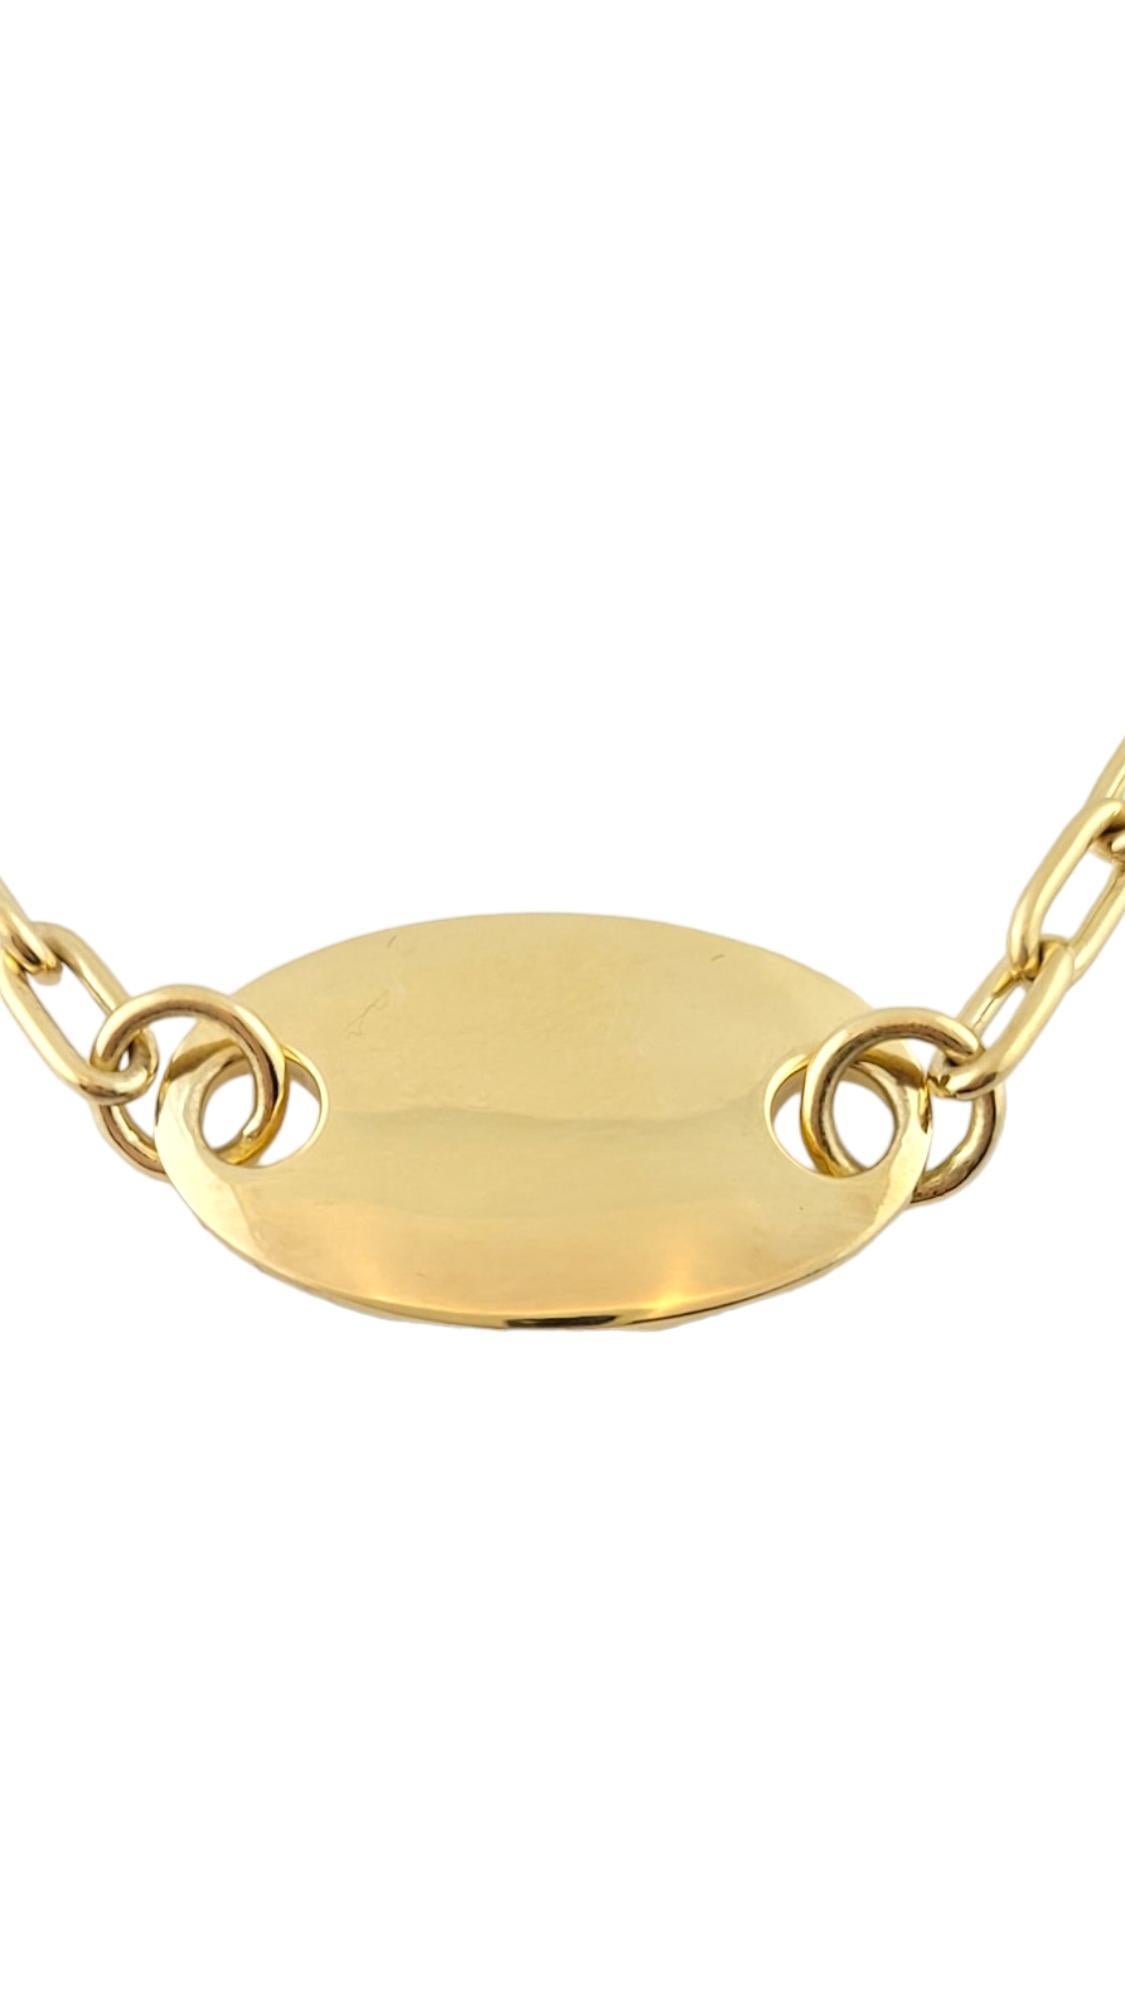 Vintage 18K Yellow Gold Pomellato ID Chain Link Necklace

Gorgeous Pomellato chain necklace crafted from 18K yellow gold for a beautiful finish!

Chain length: 15